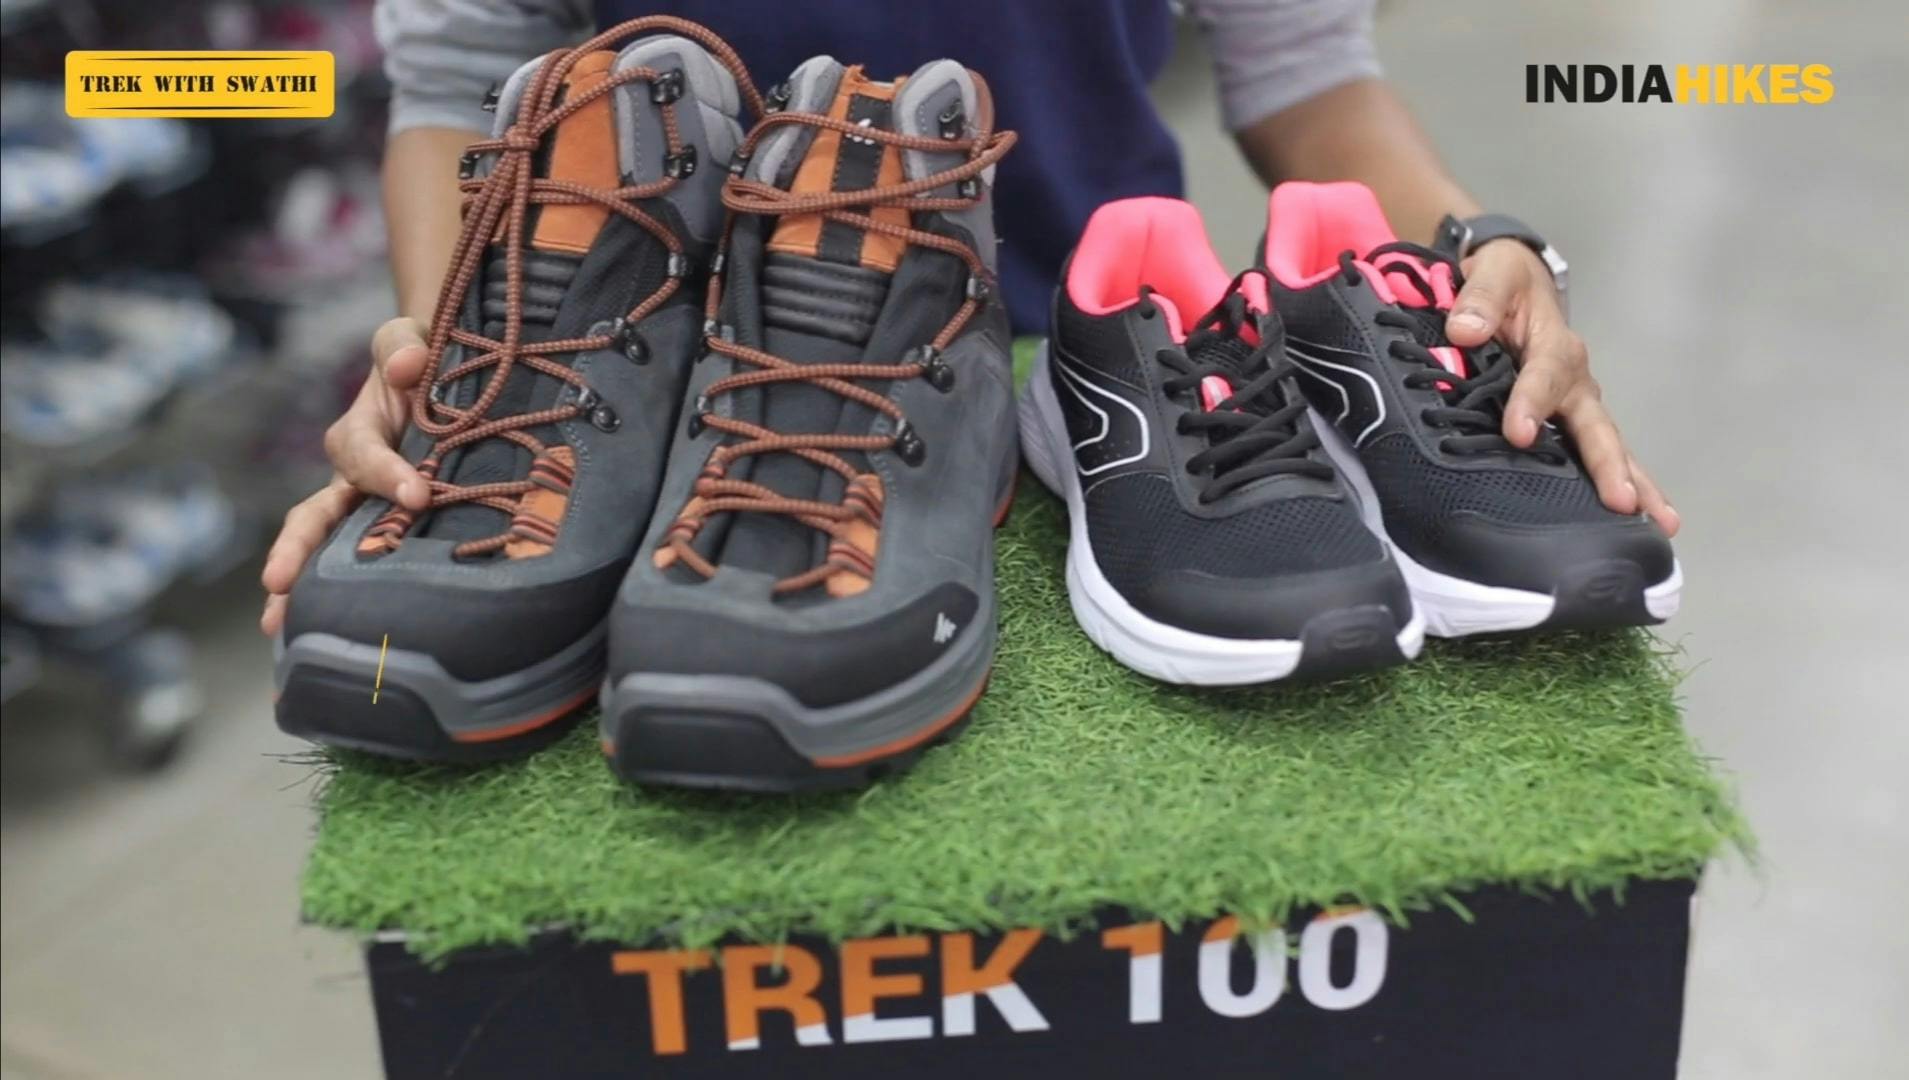 Trekking Shoes vs Sports Shoes -- Which To Choose For Your Trek